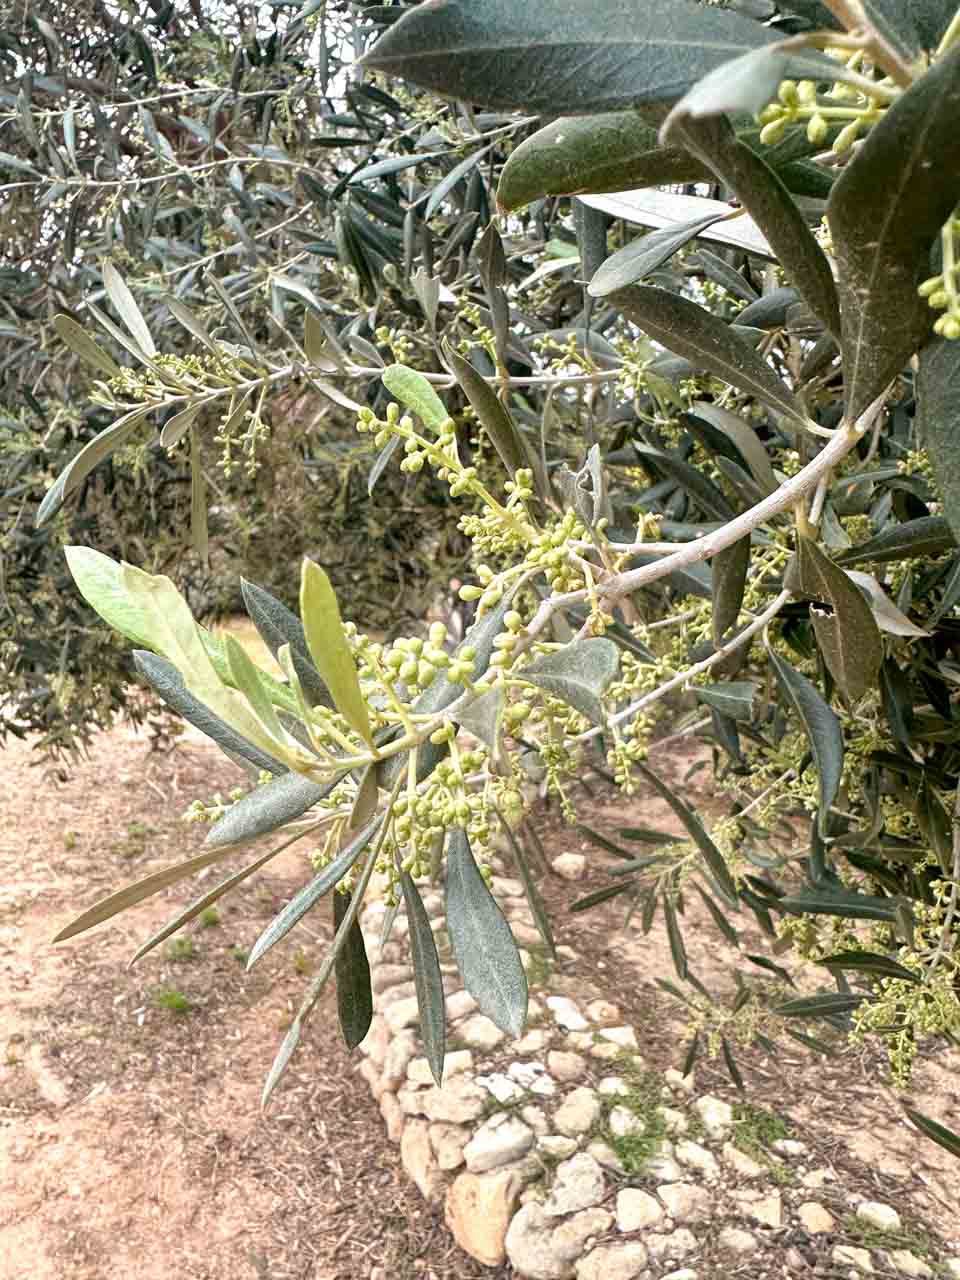 An olive branch with dozens of tiny olives on it